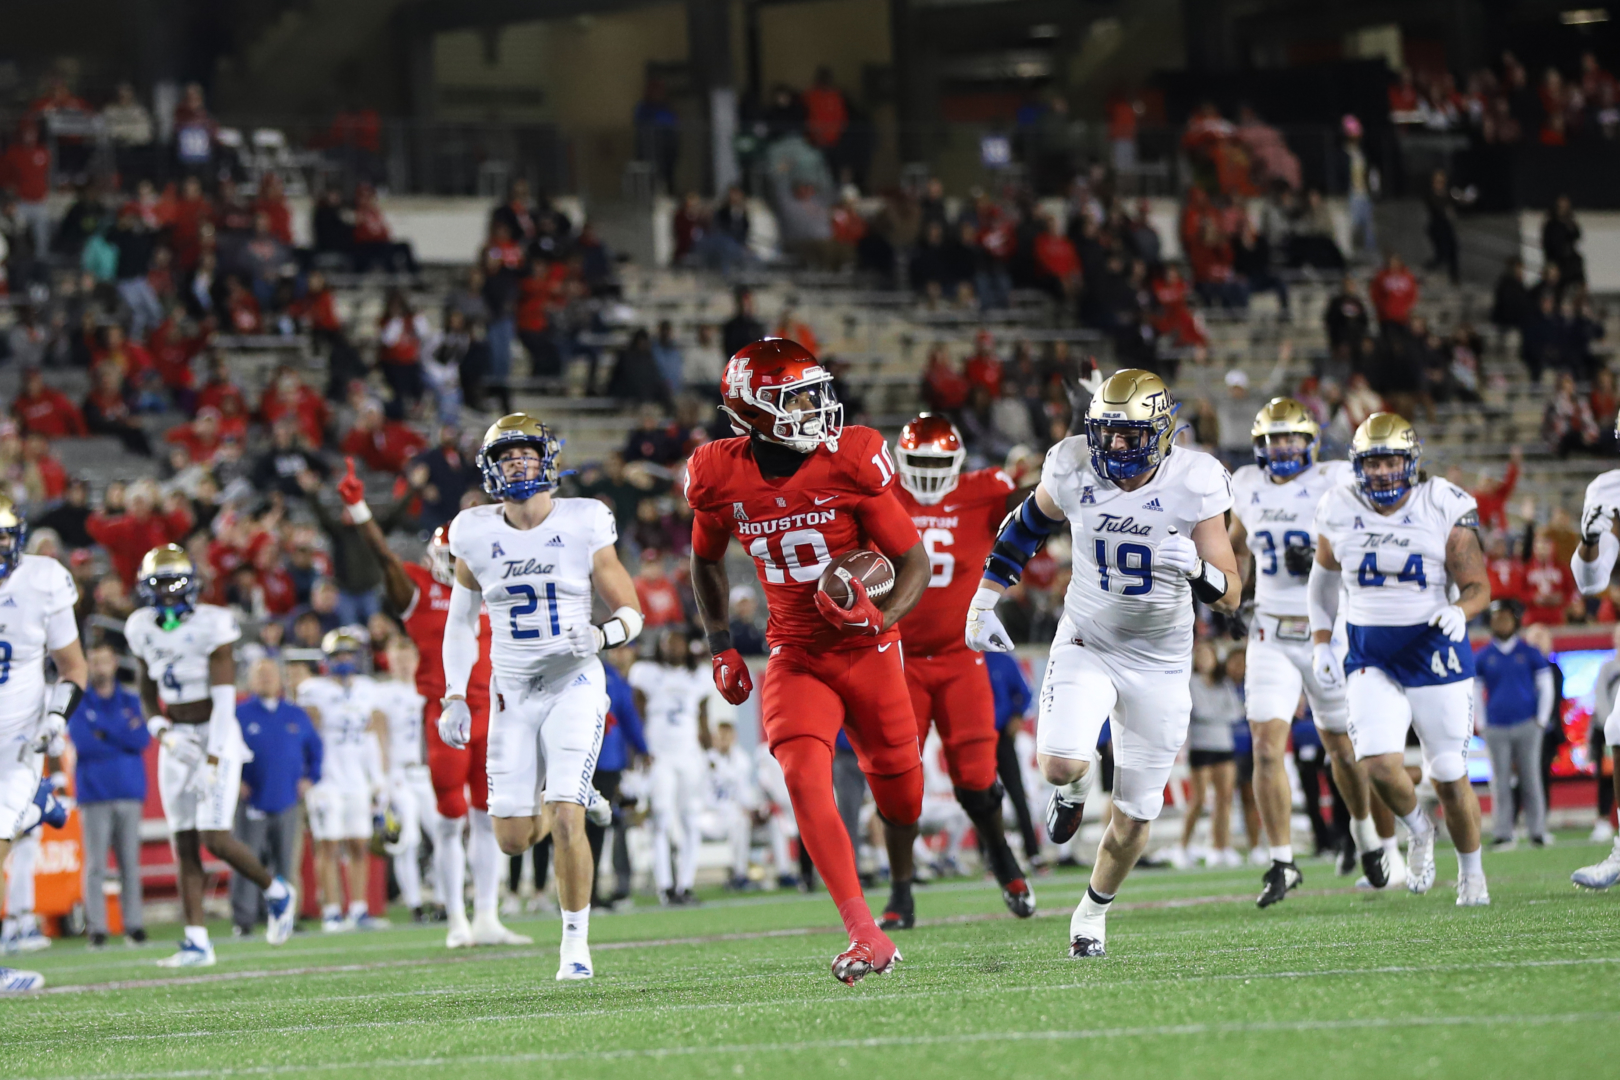 UH football freshman Matthew Golden turned a screen pass into a 27-yard touchdown in the first quarter of Houston’s loss to Tulsa on Saturday night at TDECU Stadium. | Sean Thomas/The Cougar